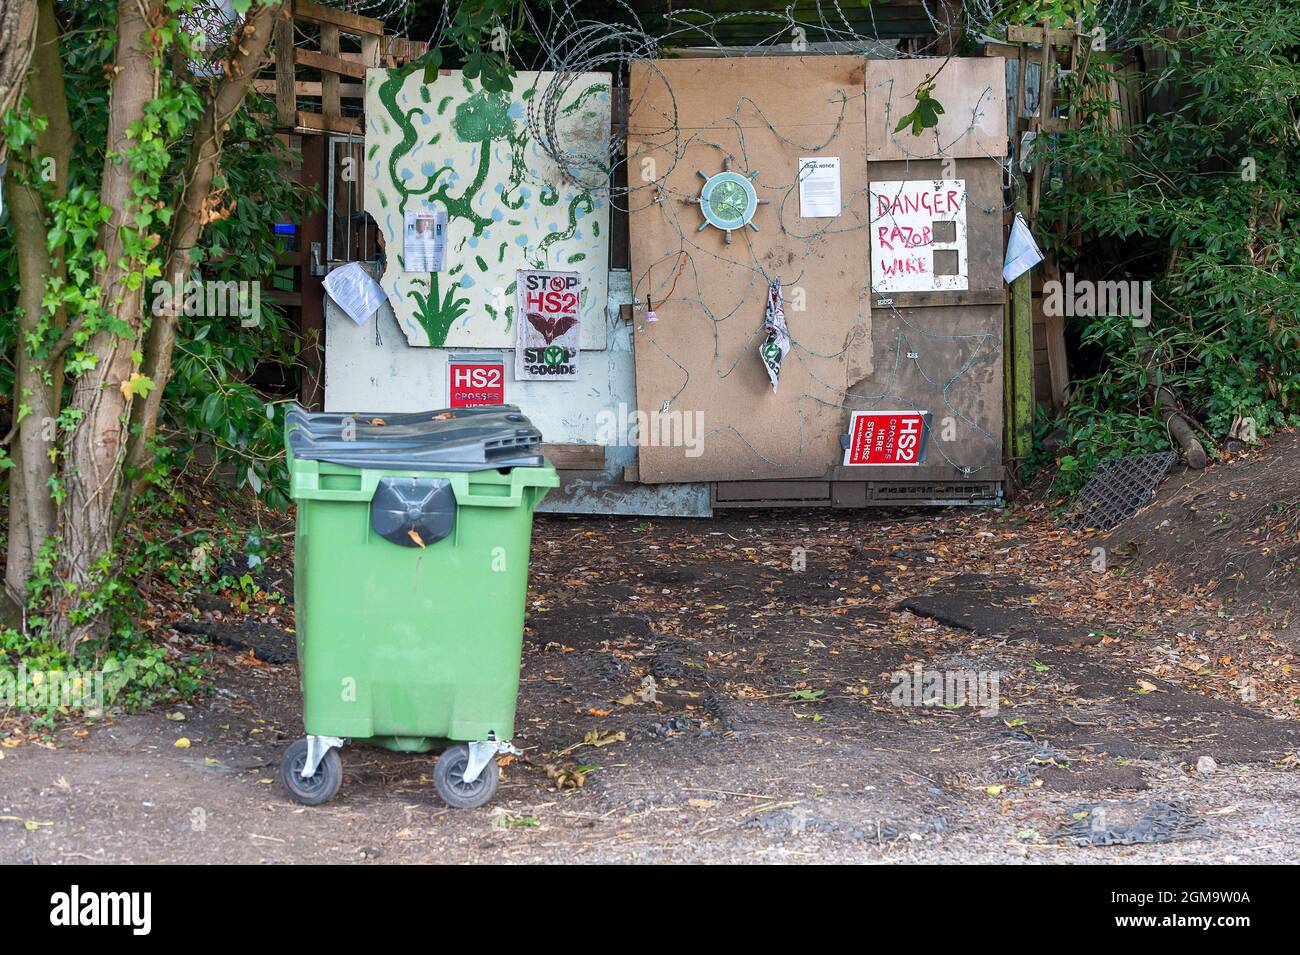 Wendover, Aylesbury, UK. 16th September, 2021. Buckinghamshire Council are doing rubbish collections from the anti HS2 Wendover Active Resistance WAR camp where environmental activists have been living for over a year. Credit: Maureen McLean/Alamy Stock Photo